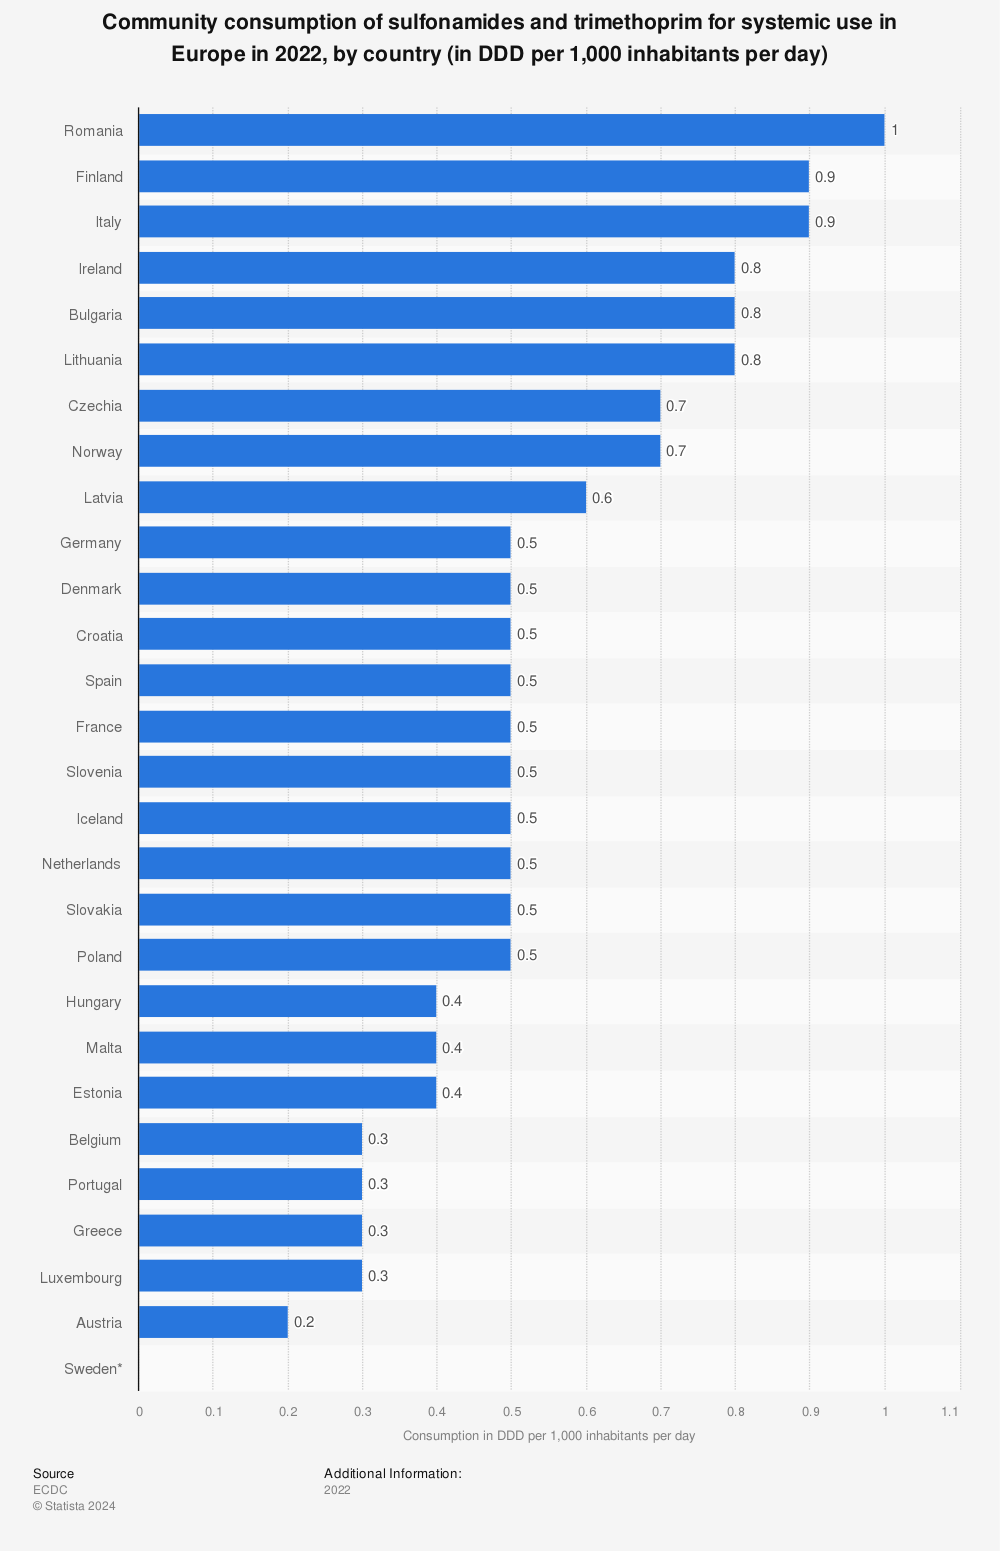 Statistic: Community consumption of sulfonamides and trimethoprim for systemic use in Europe in 2022, by country (in DDD per 1,000 inhabitants per day) | Statista